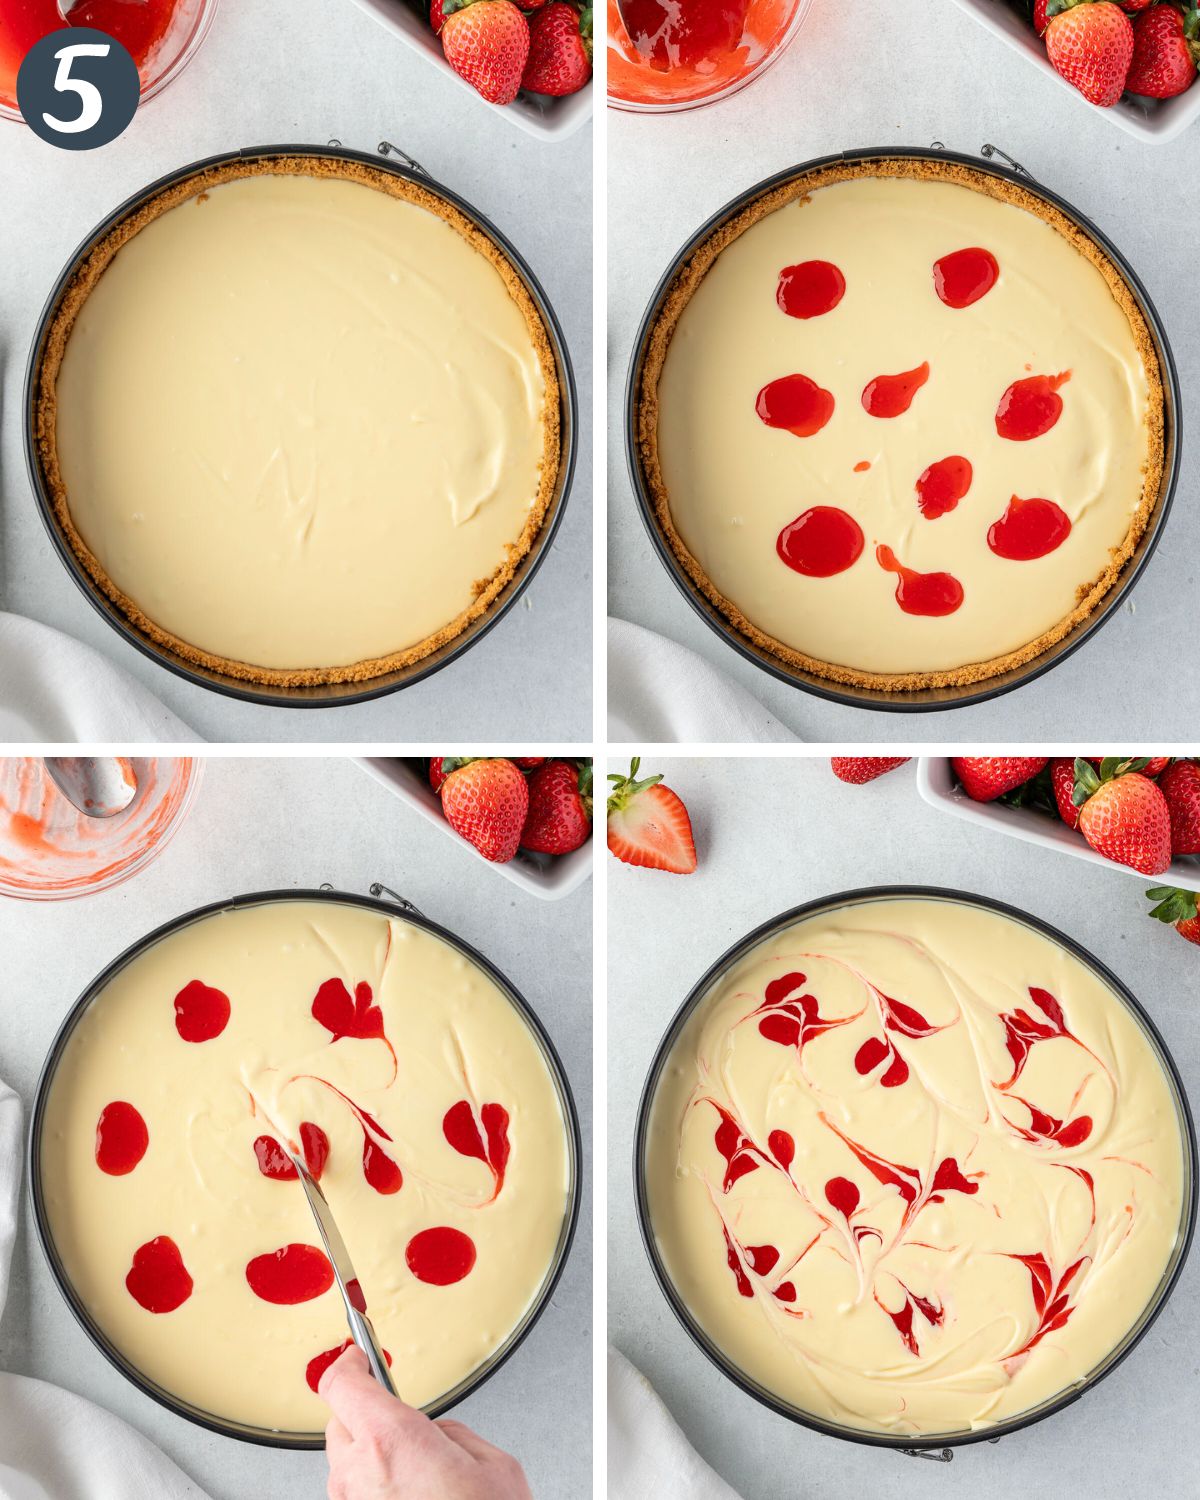 4 images: 1) Cheesecake filling in pan. 2) Strawberry dollops. 3) Knife swirling sauce. 4) Ready to bake.